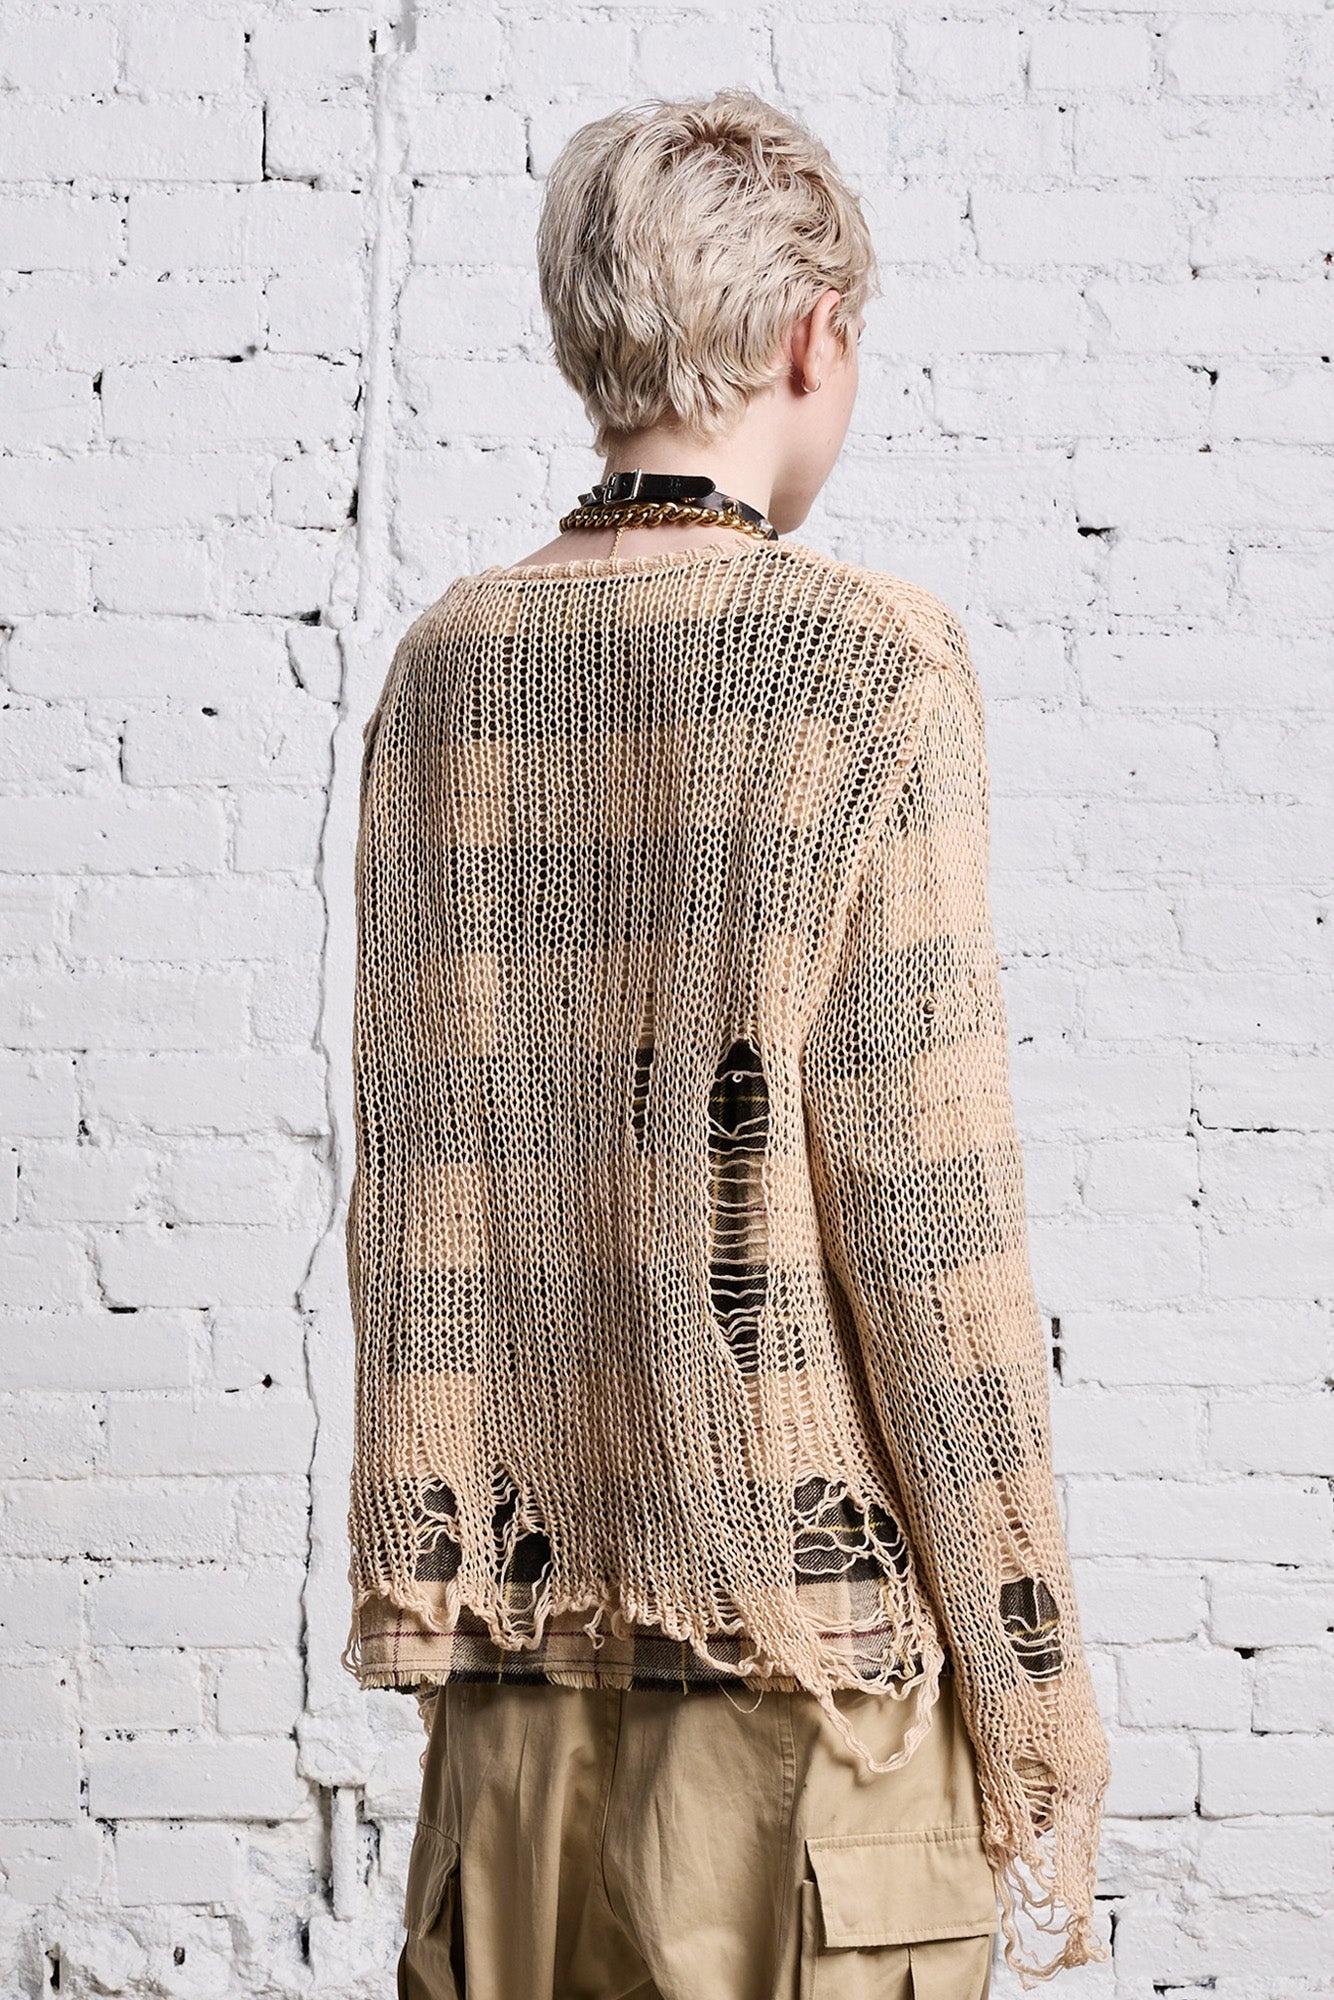 RELAXED OVERLAY CREWNECK - CREAM AND BLACK PLAID - 6